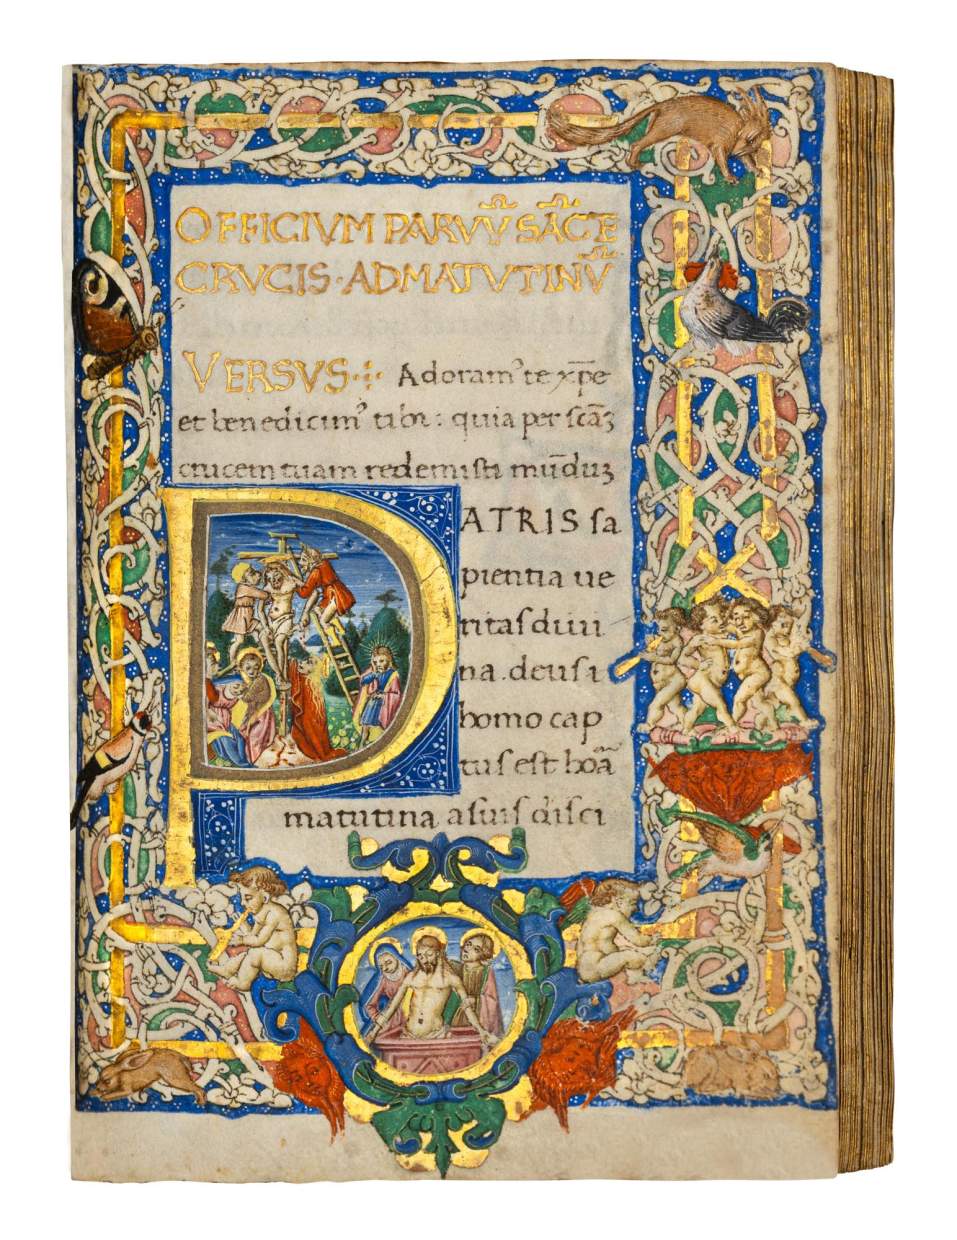 Playing among white Vines: The Rosenberg Book of Hours